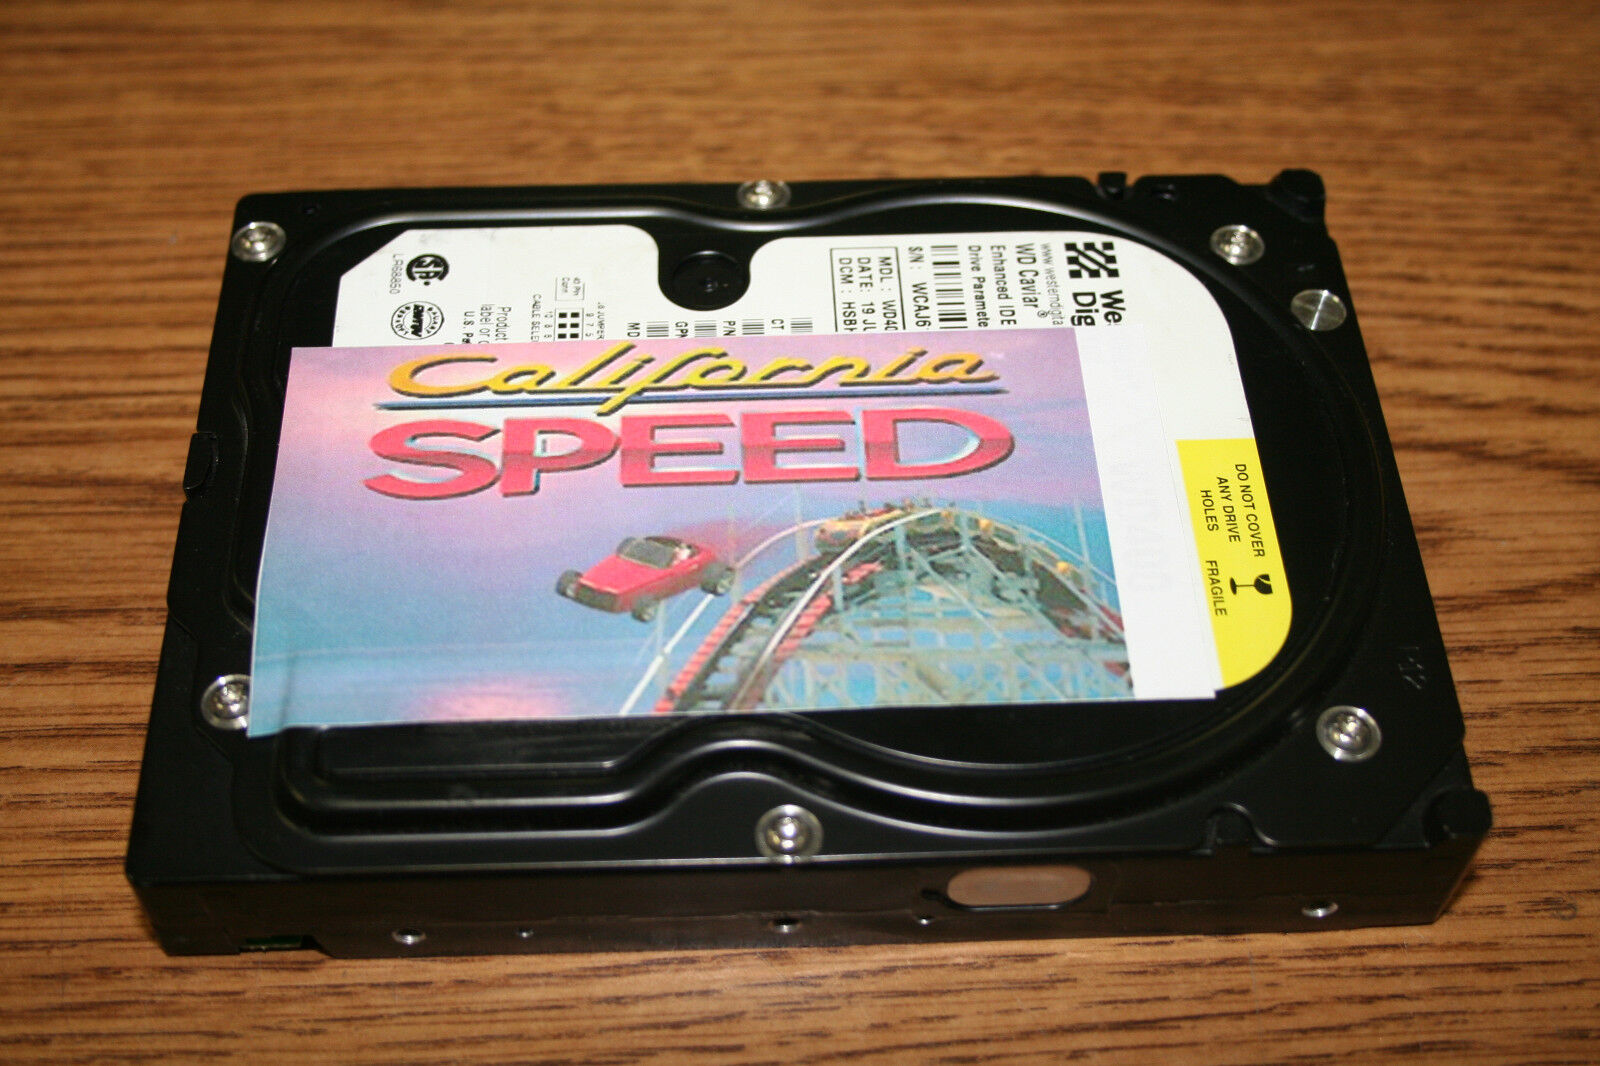 CALIFORNIA SPEED ATARI REPLACEMENT HARD DRIVE FOR ARCADE GAME TESTED WORKING